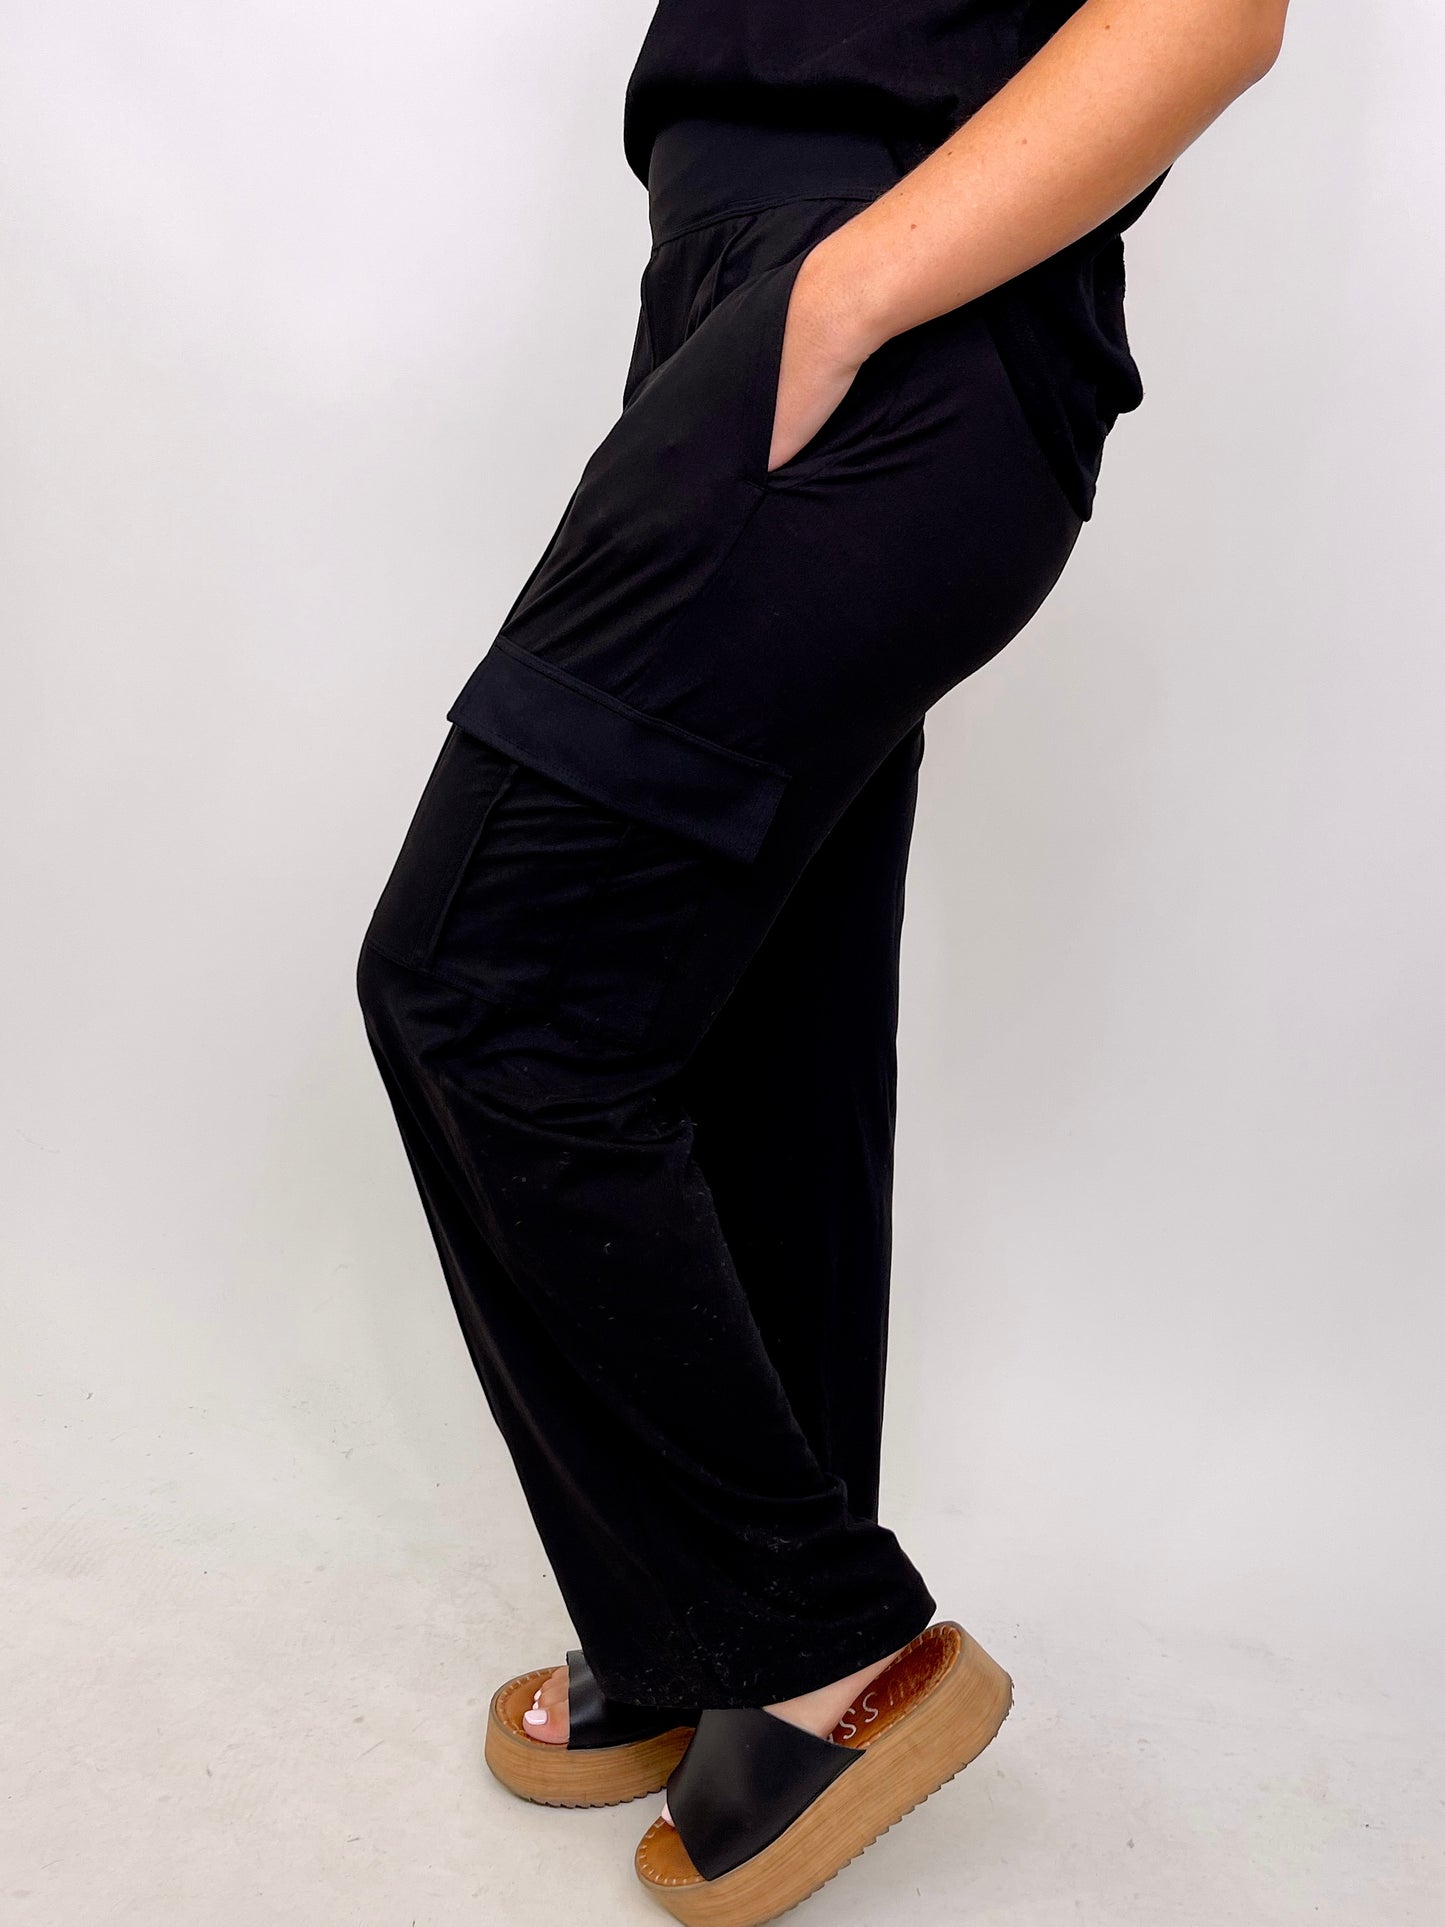 Staycation Lounge Pant-Lounge Pants-Rae Mode-The Village Shoppe, Women’s Fashion Boutique, Shop Online and In Store - Located in Muscle Shoals, AL.